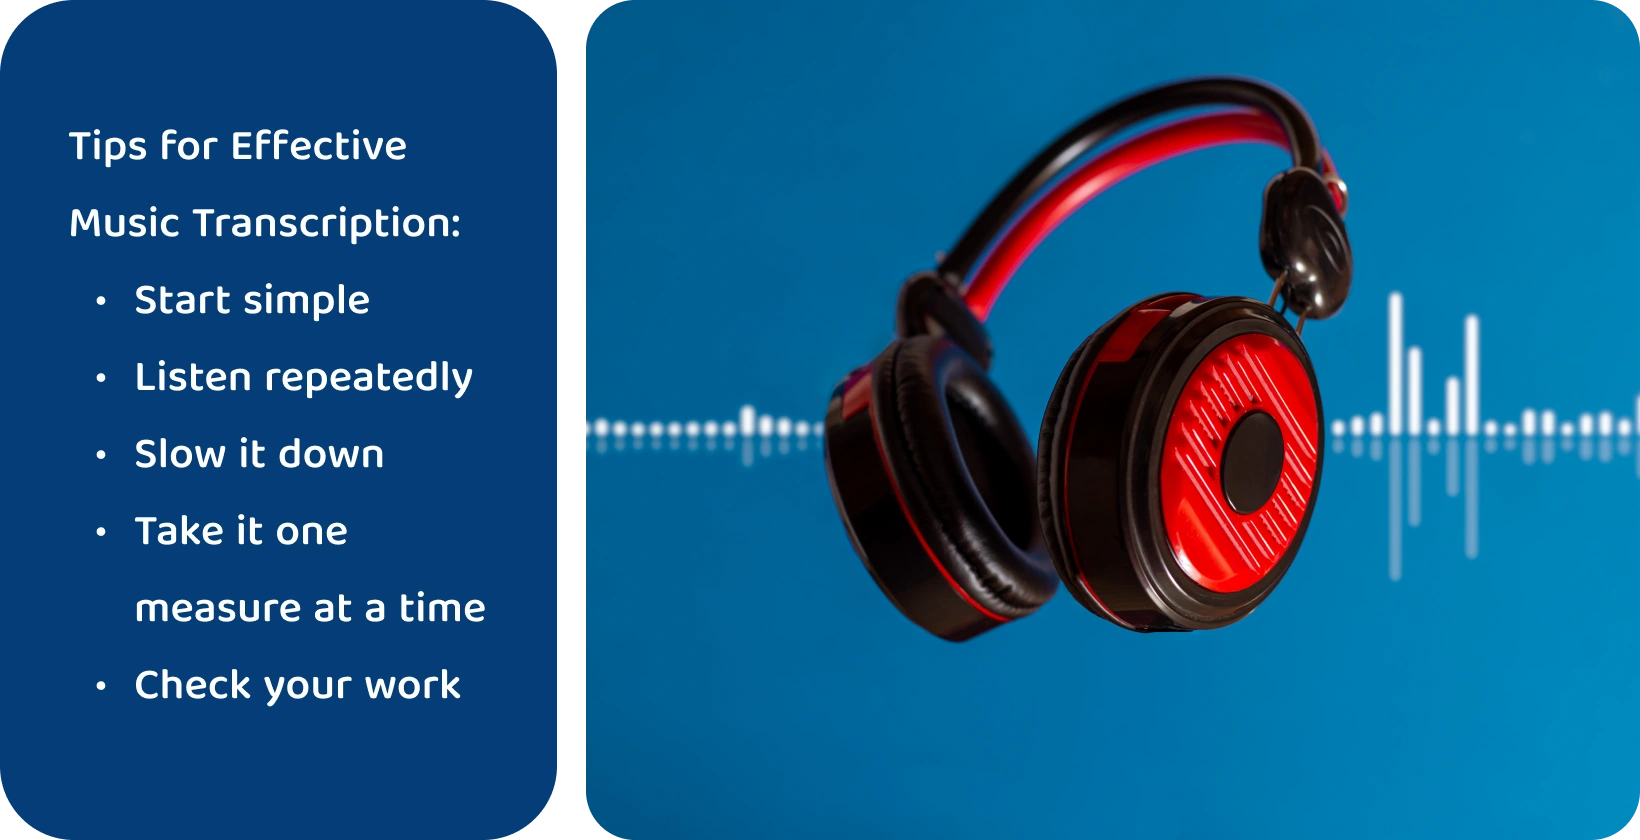 Headphones against a waveform backdrop, representing tools for enhancing music transcription through focused and repeated listening.